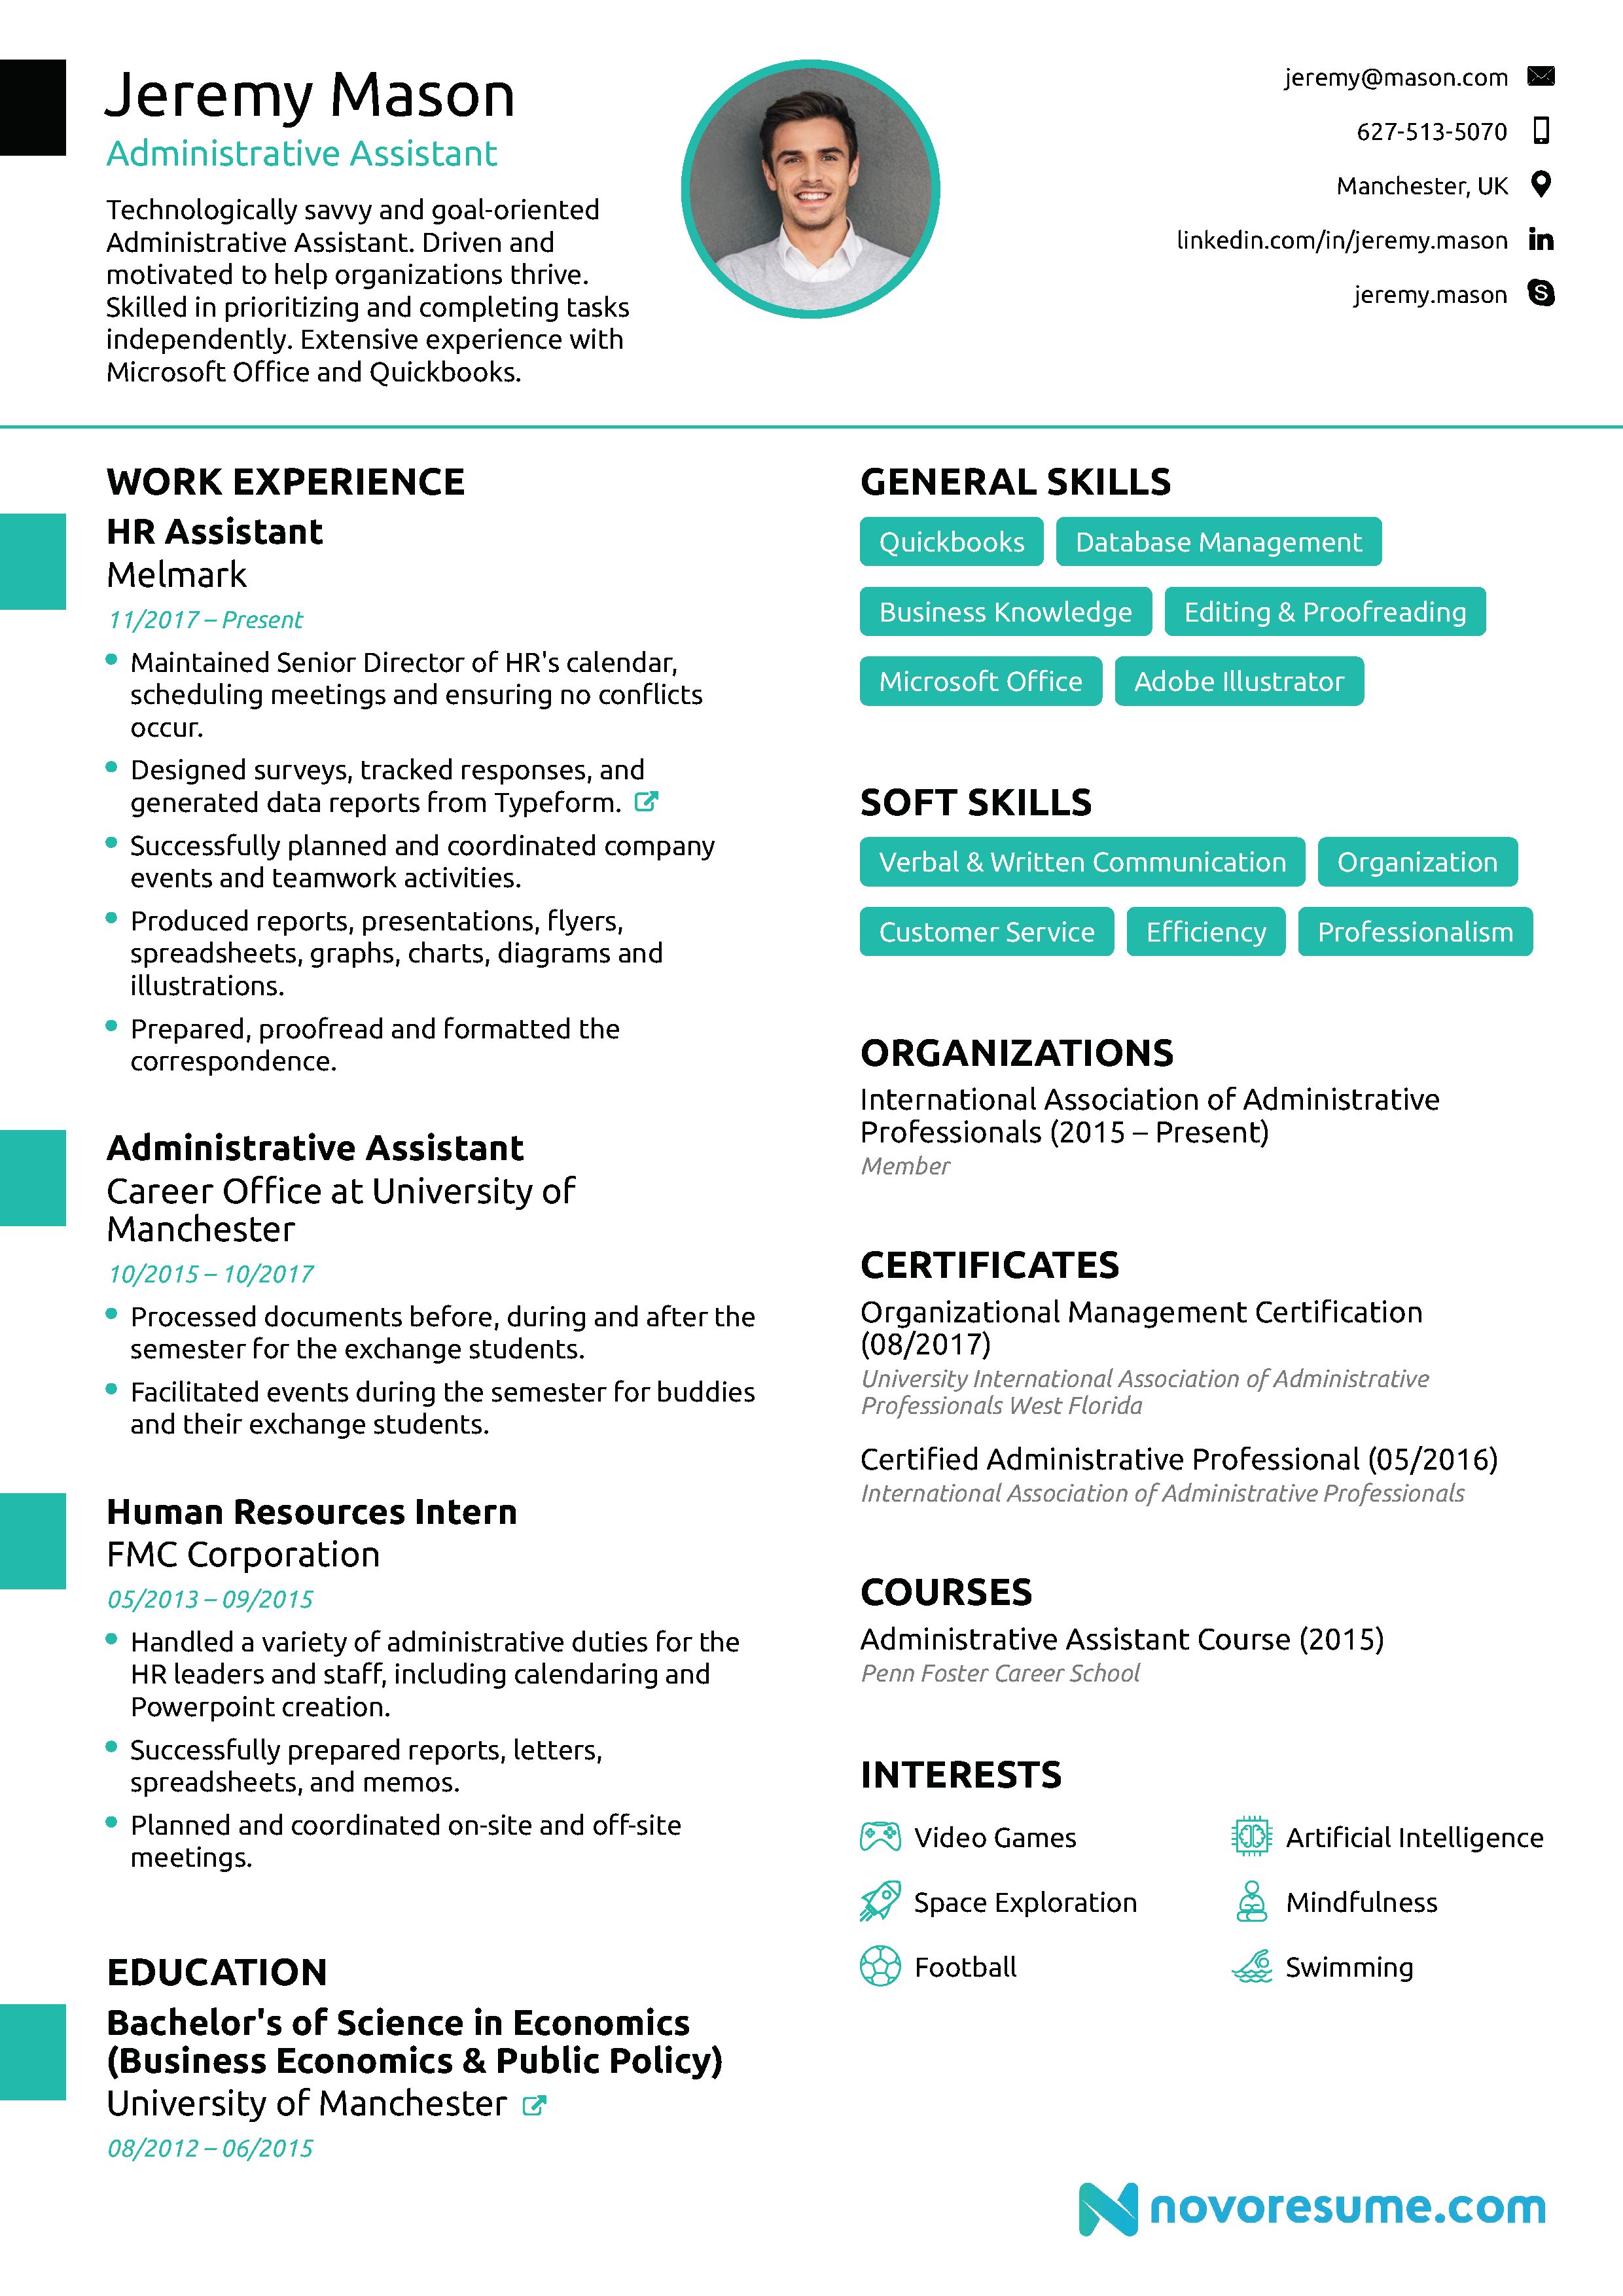 Administrative Assistant Resume [10] - Guide & Examples Throughout Office Assistant Job Description Template In Office Assistant Job Description Template